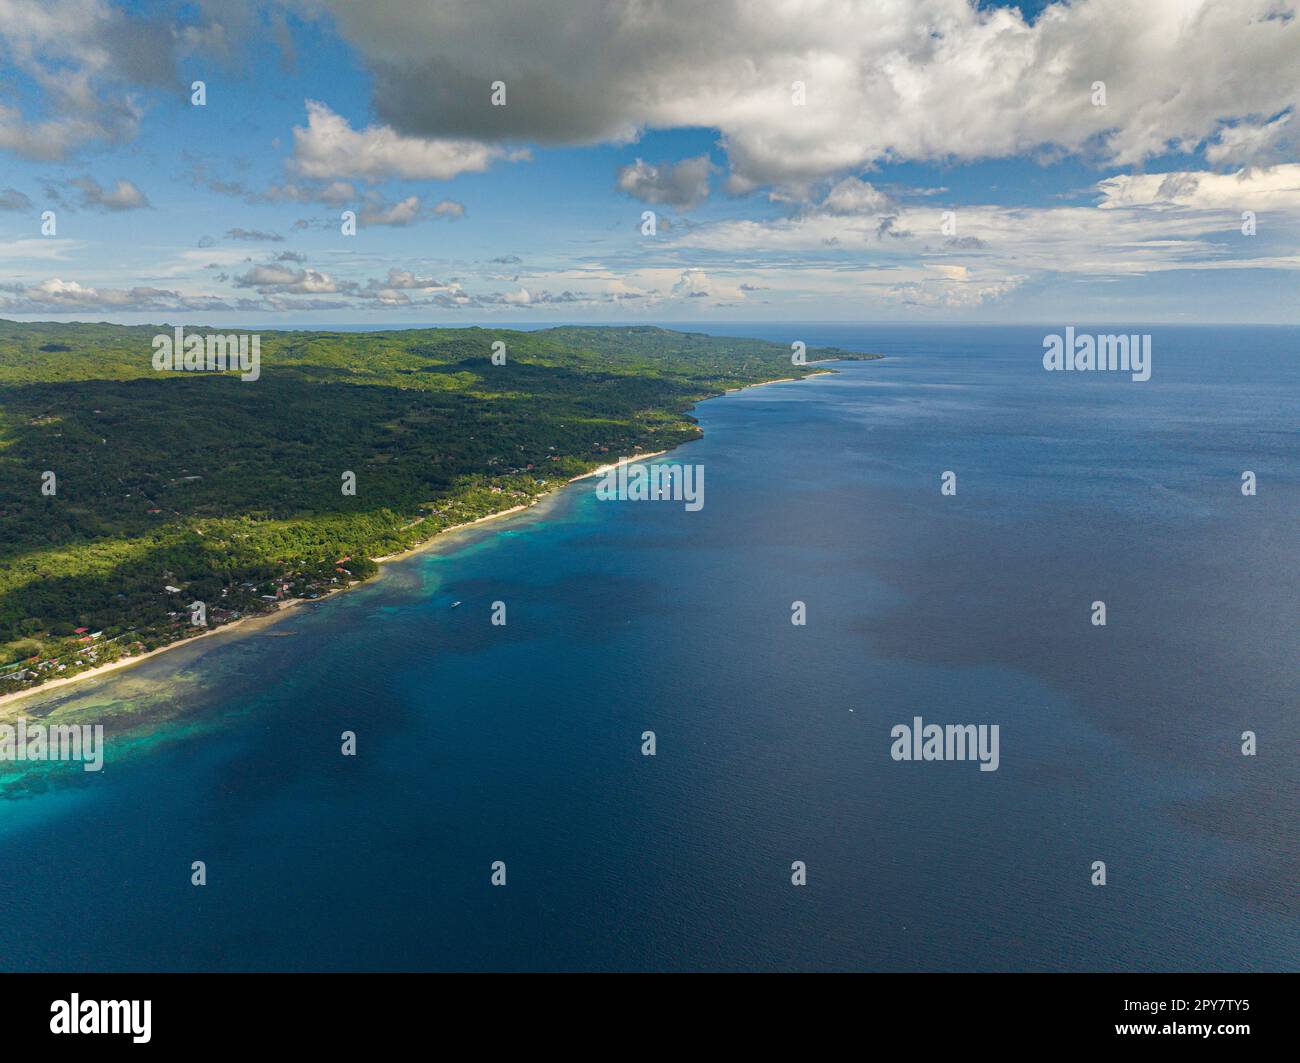 Aerial view of four boats enjoying the tropical island with a beach in the open ocean under the big clouds in the skyline. Siquijor, Philippines. Stock Photo